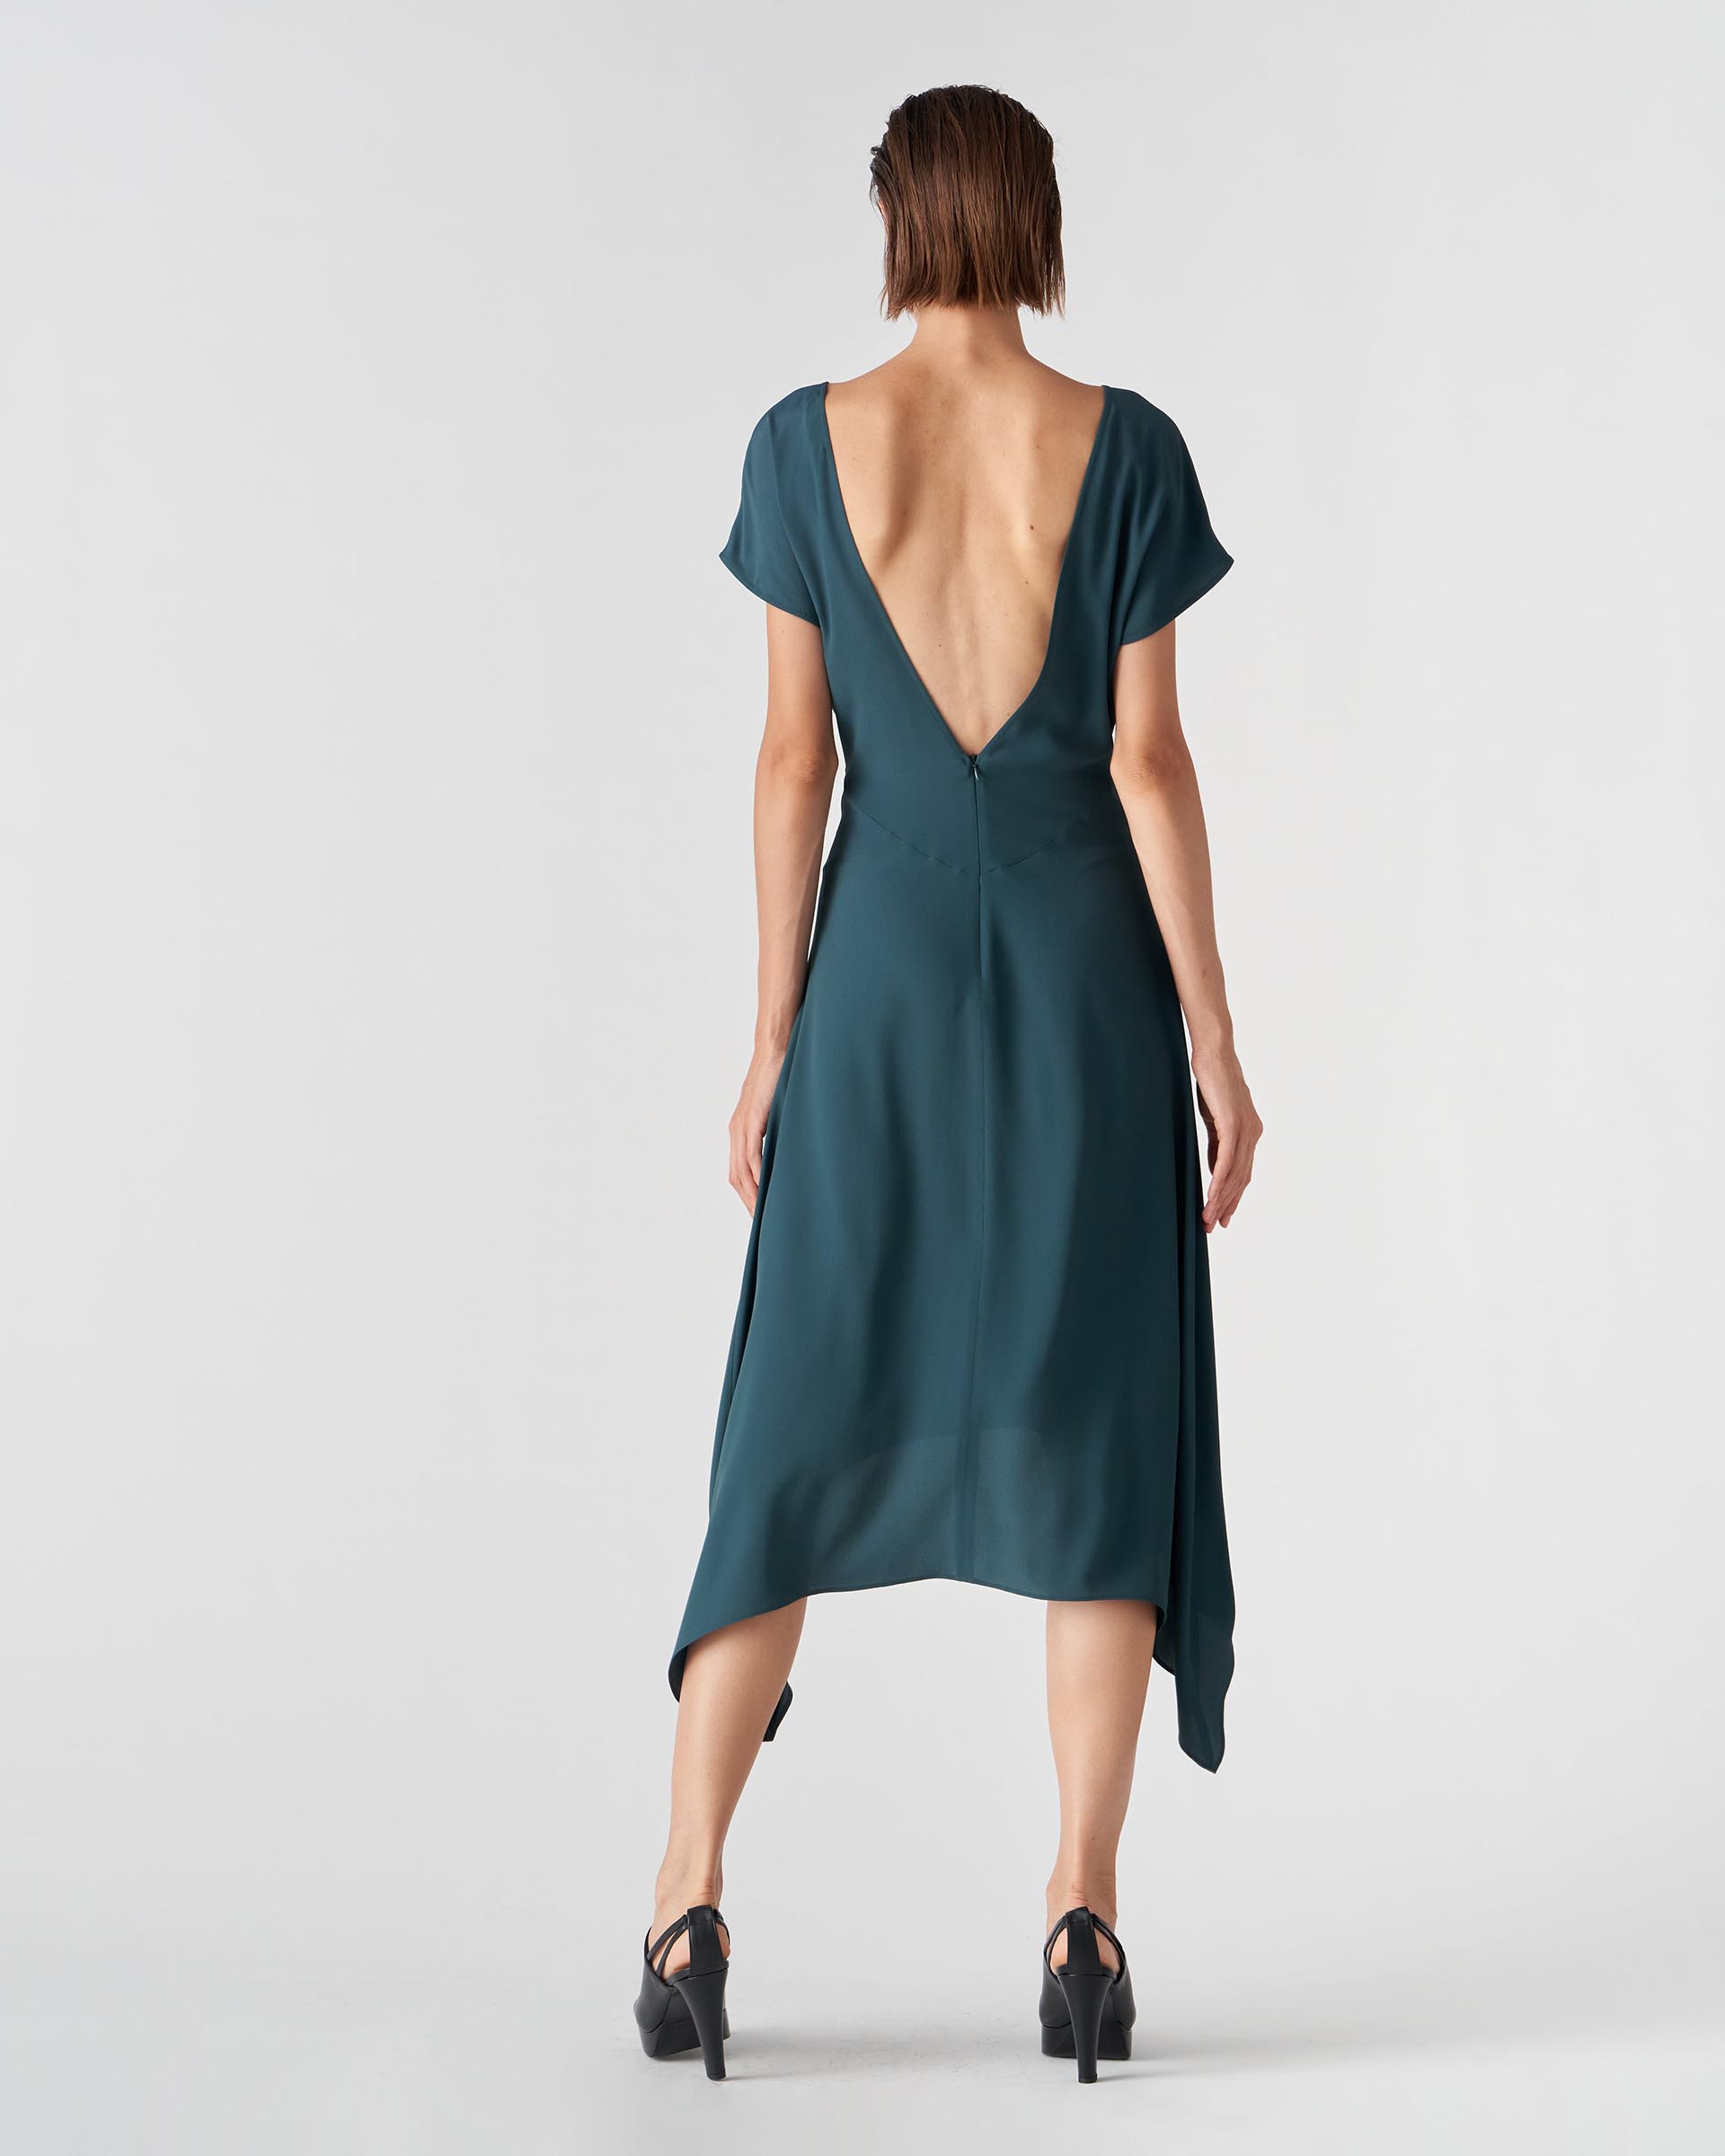 The Market Store | Dress With Back Neckline